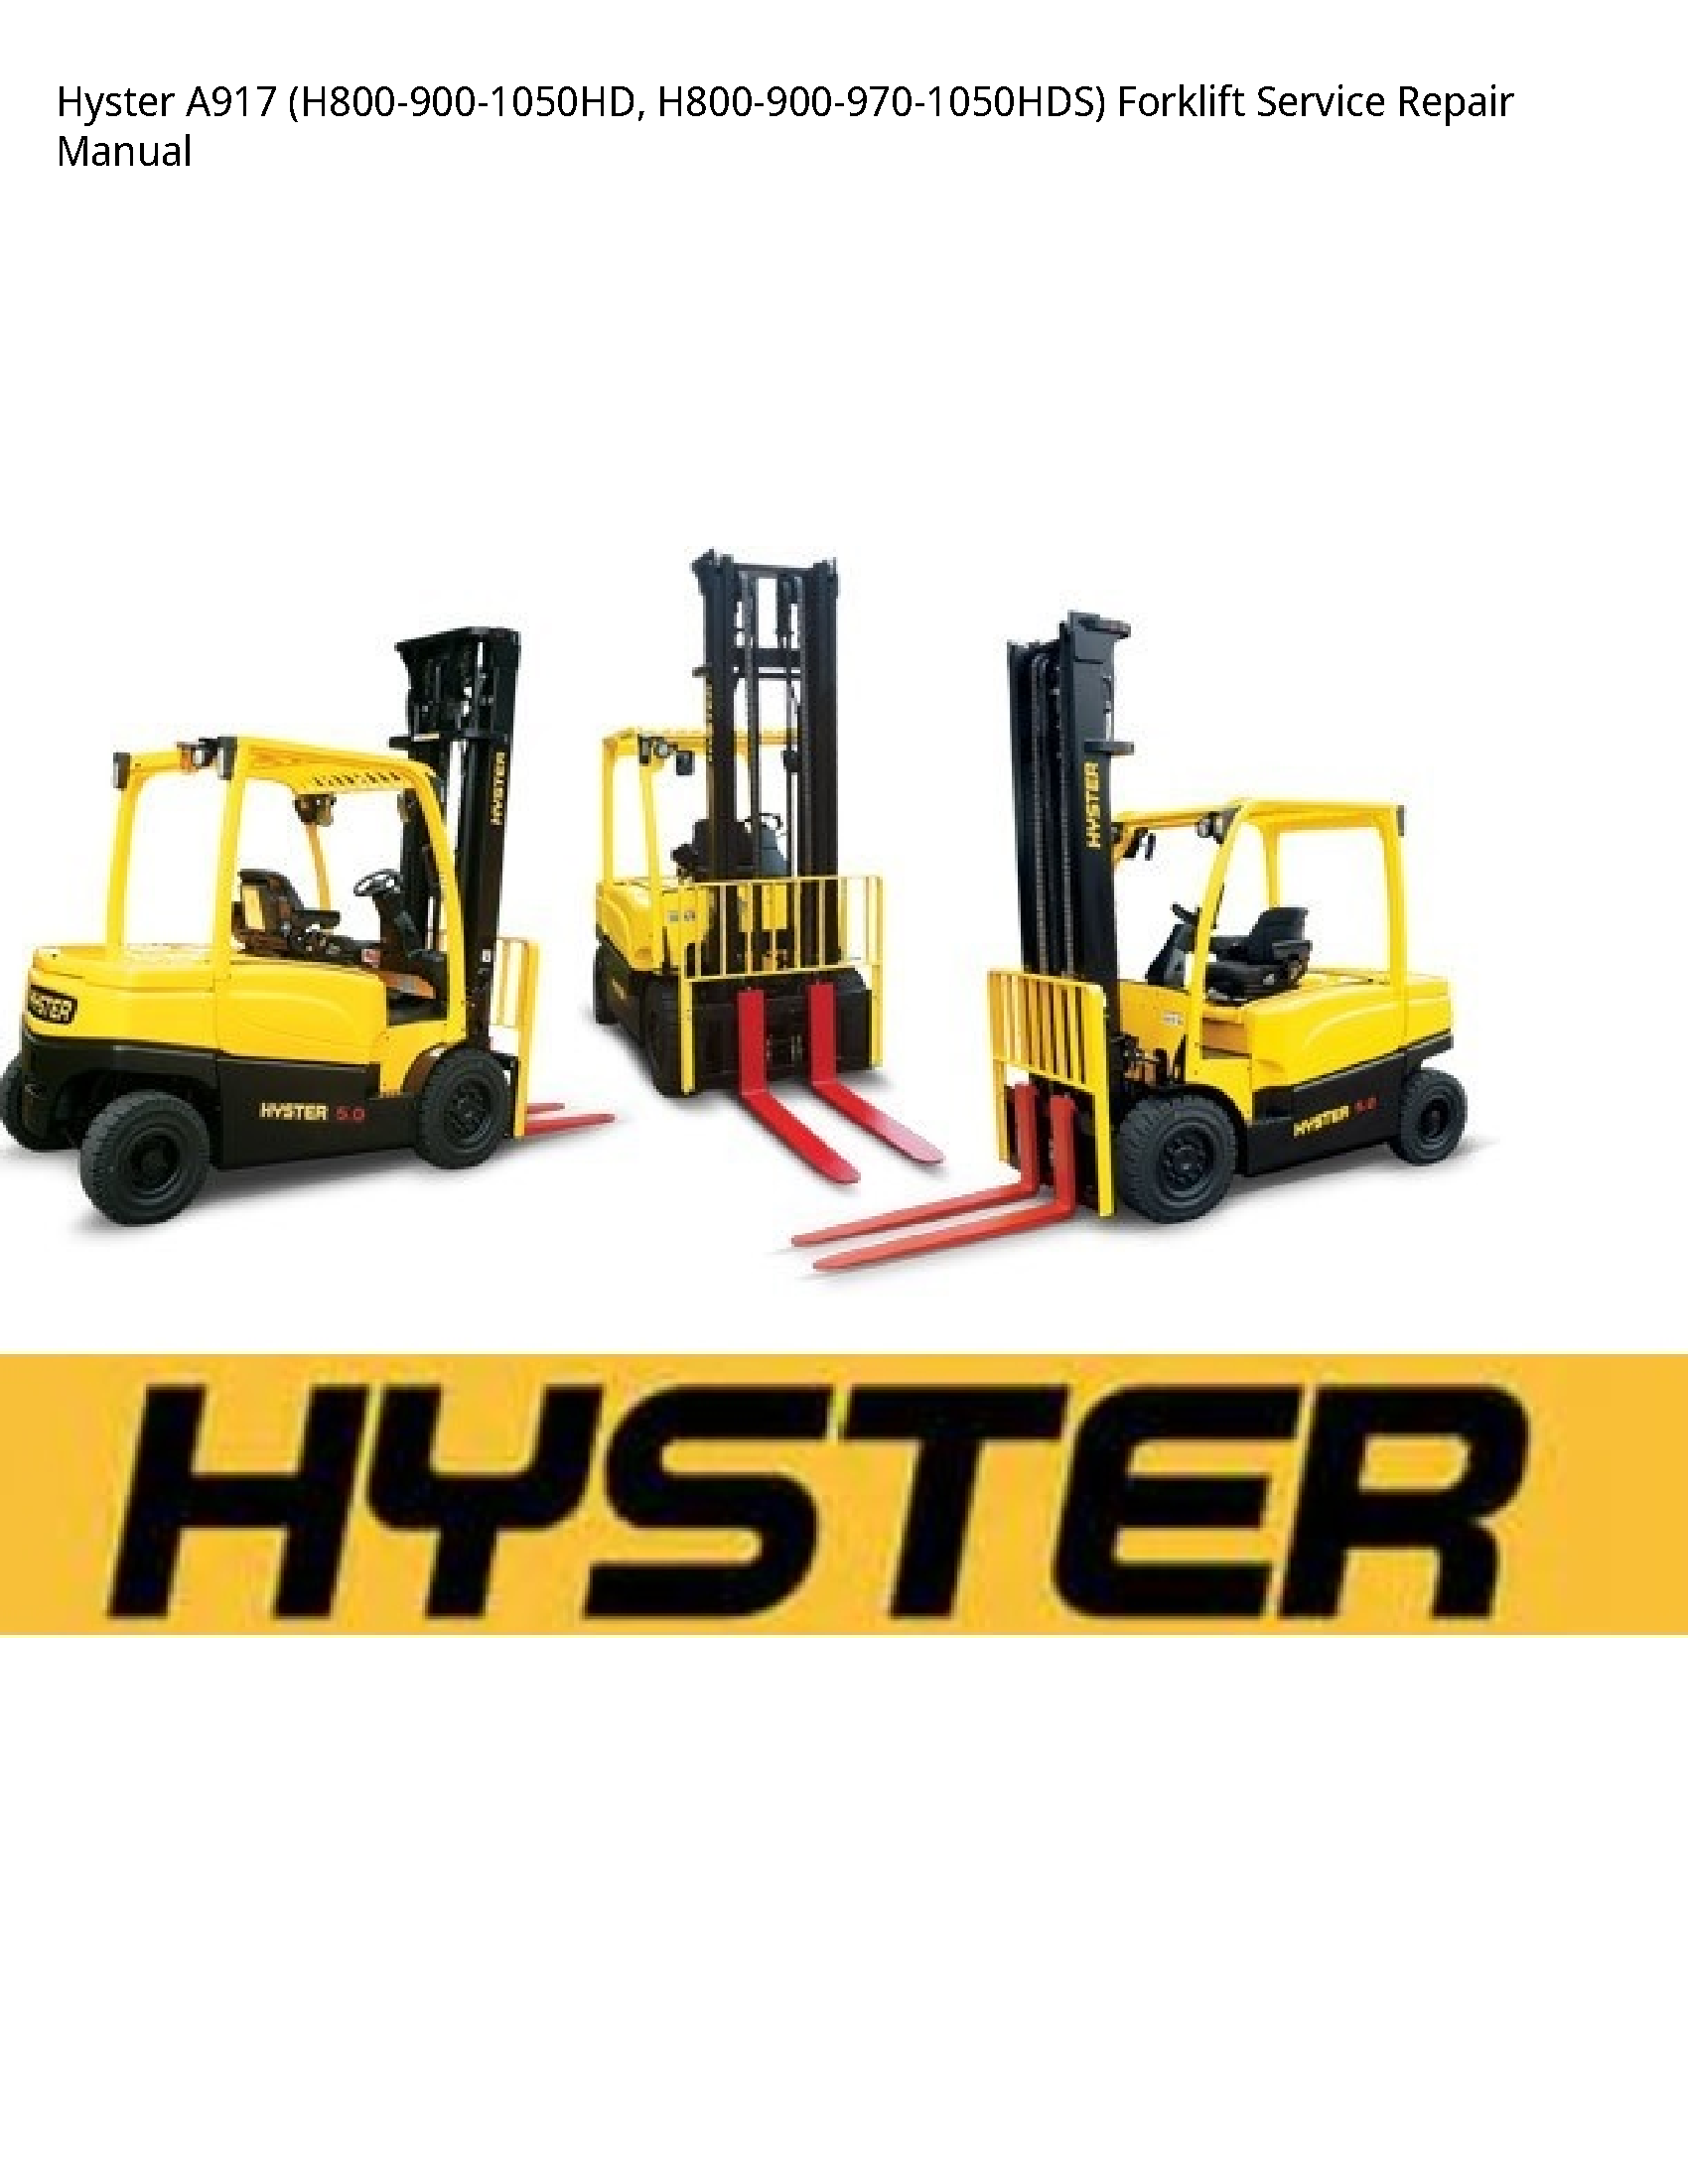 Hyster A917 Forklift manual